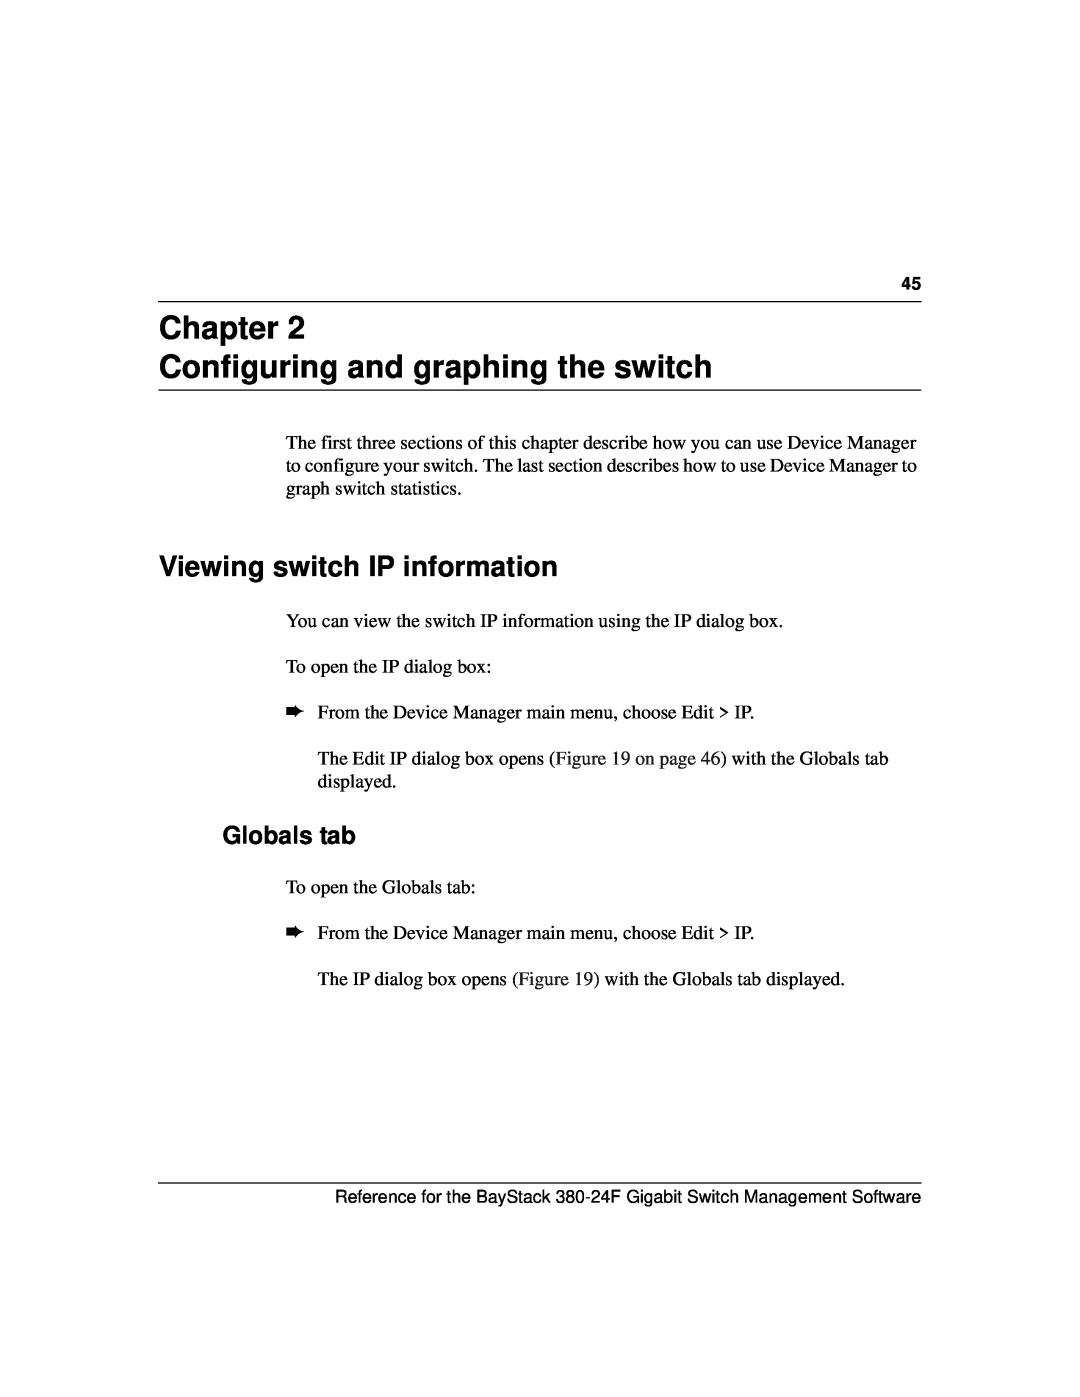 Nortel Networks 214393-A manual Chapter Configuring and graphing the switch, Viewing switch IP information, Globals tab 